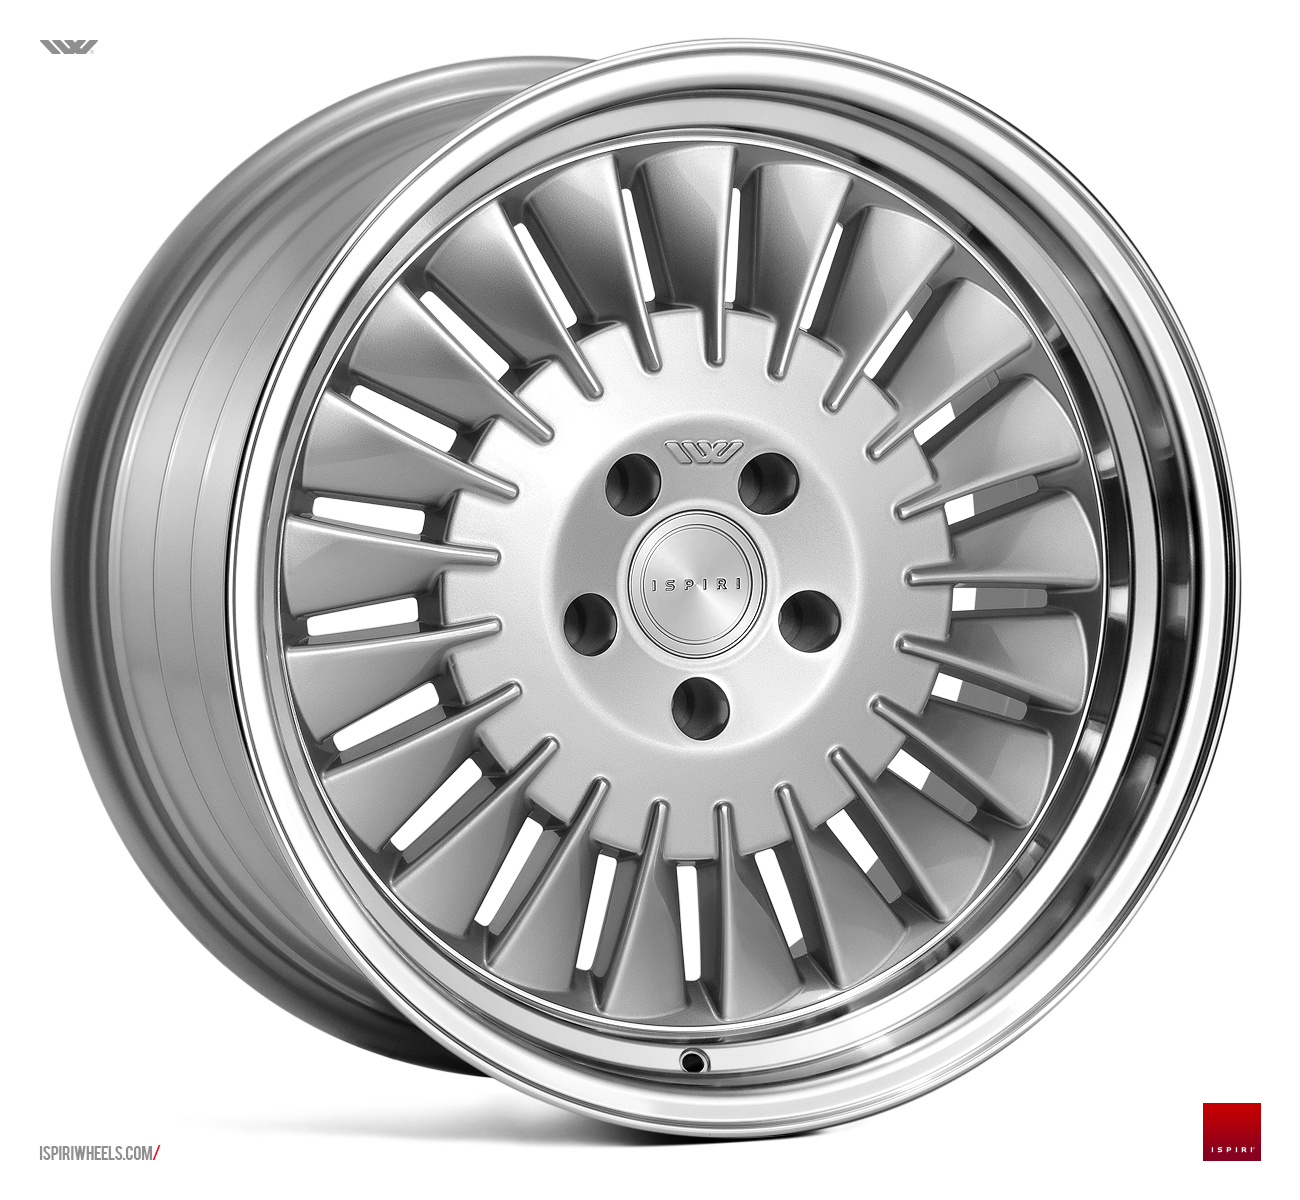 NEW 19" ISPIRI CSR1D DIRECTIONAL ALLOY WHEELS IN SILVER WITH POLISHED LIP, WIDER 10" REARS, et32/et42